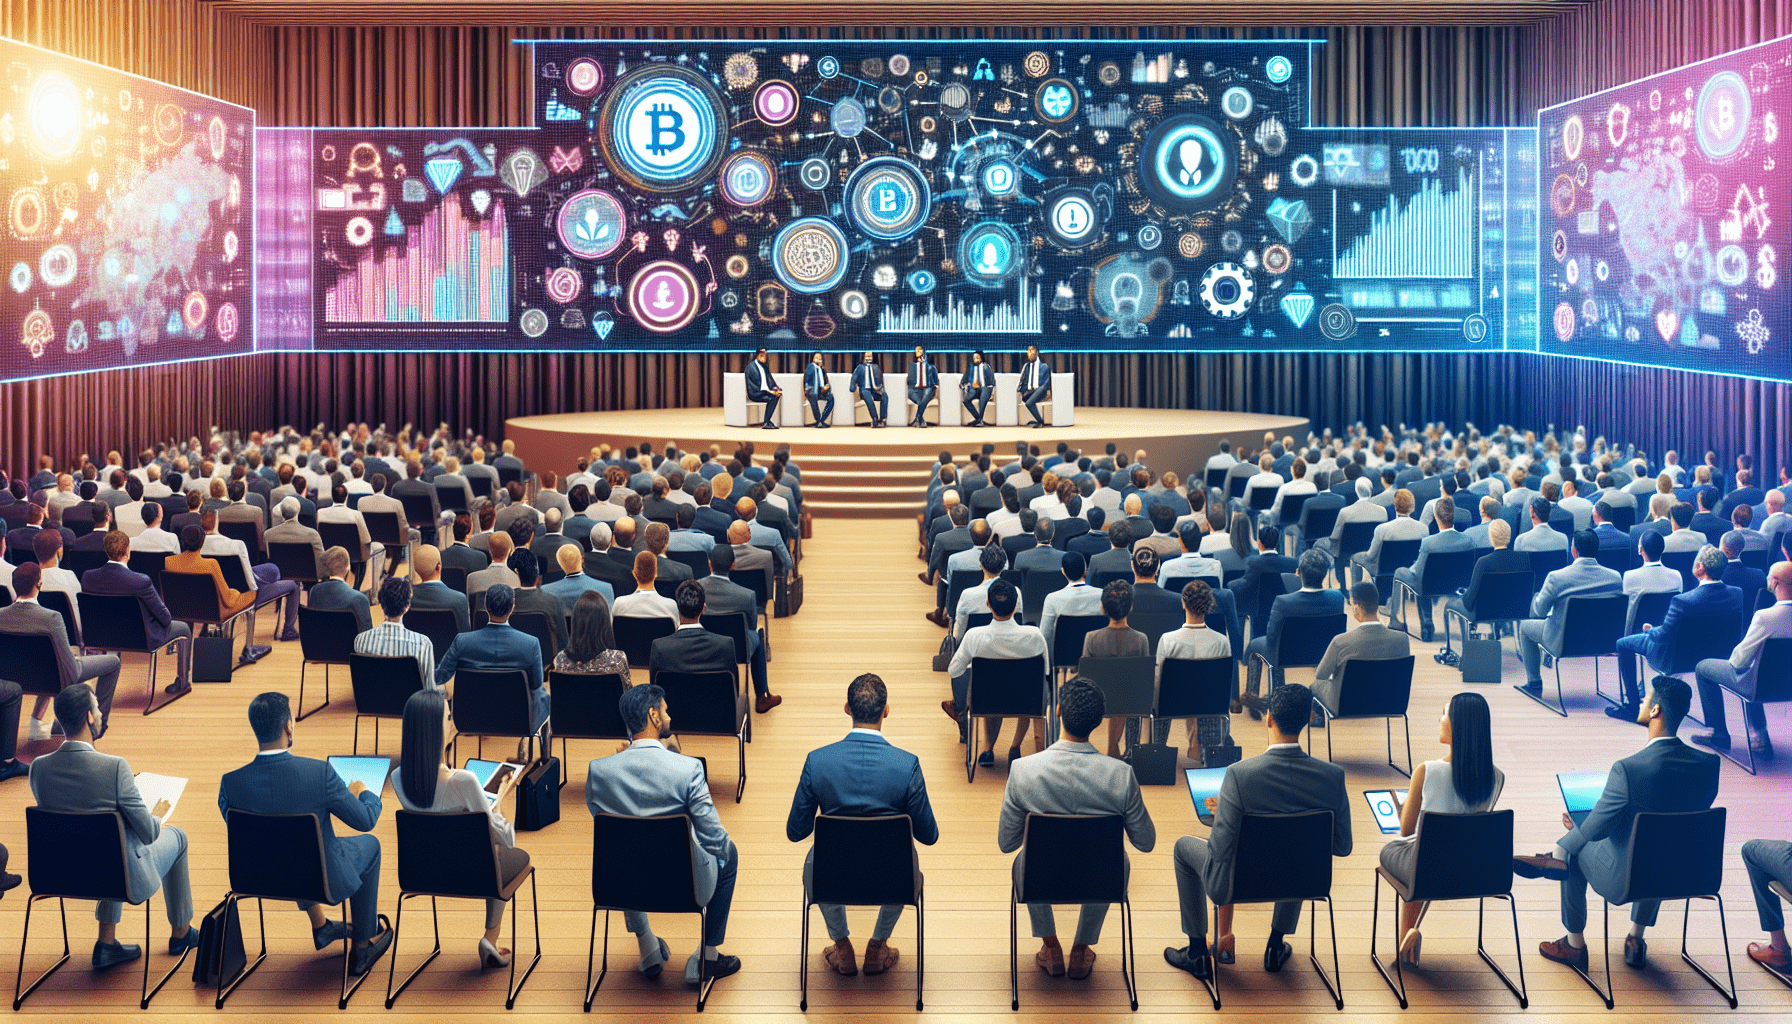 Attend Conferences: Attend Cryptocurrency Conferences And Events.